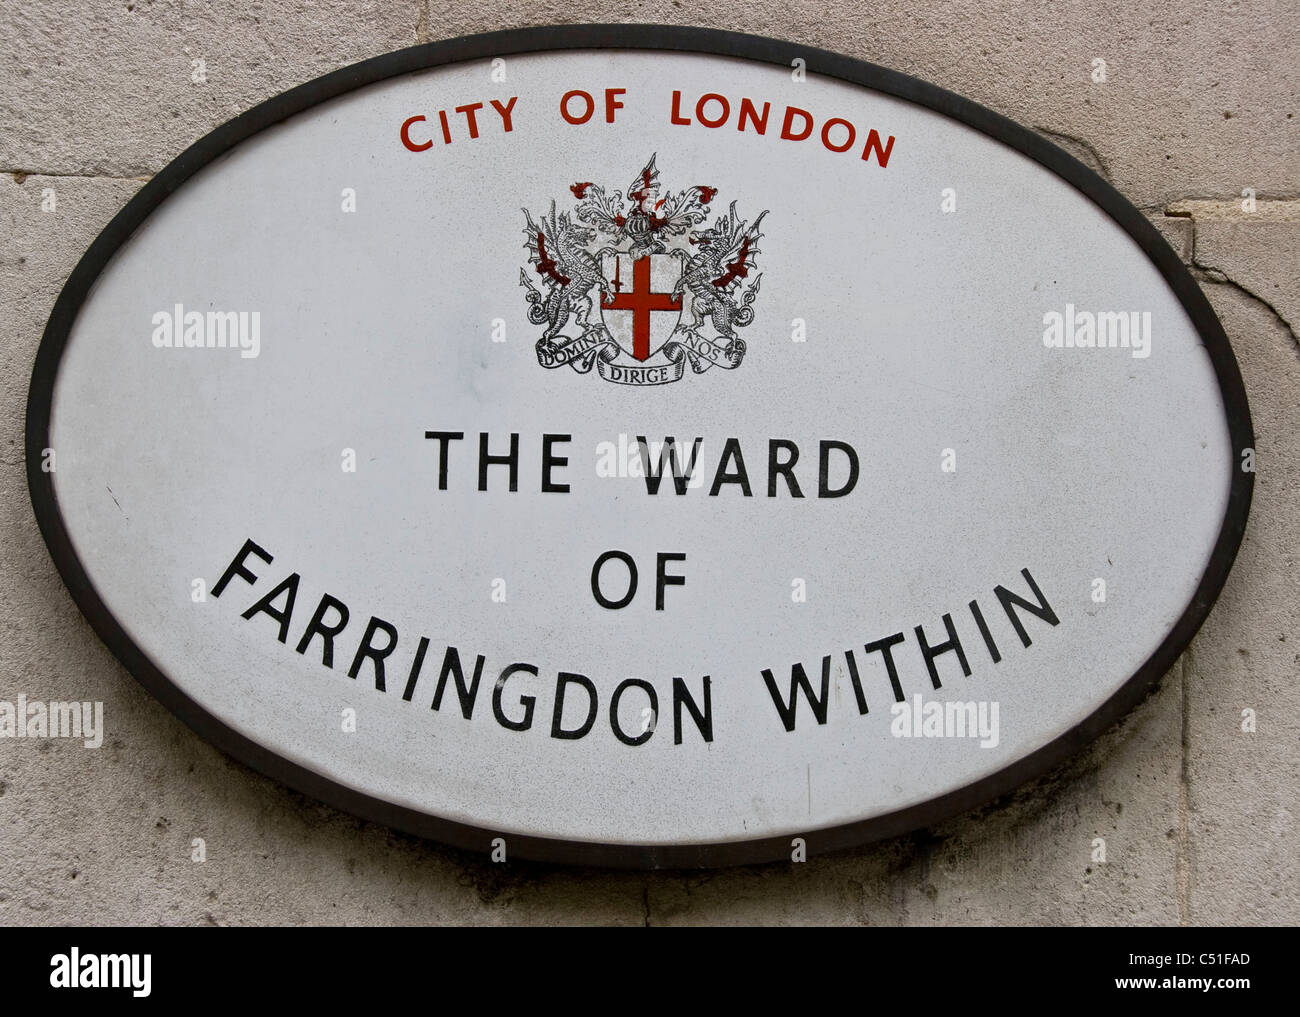 Plaque for the Ward of Farringdon Within in the City of London England Europe Stock Photo